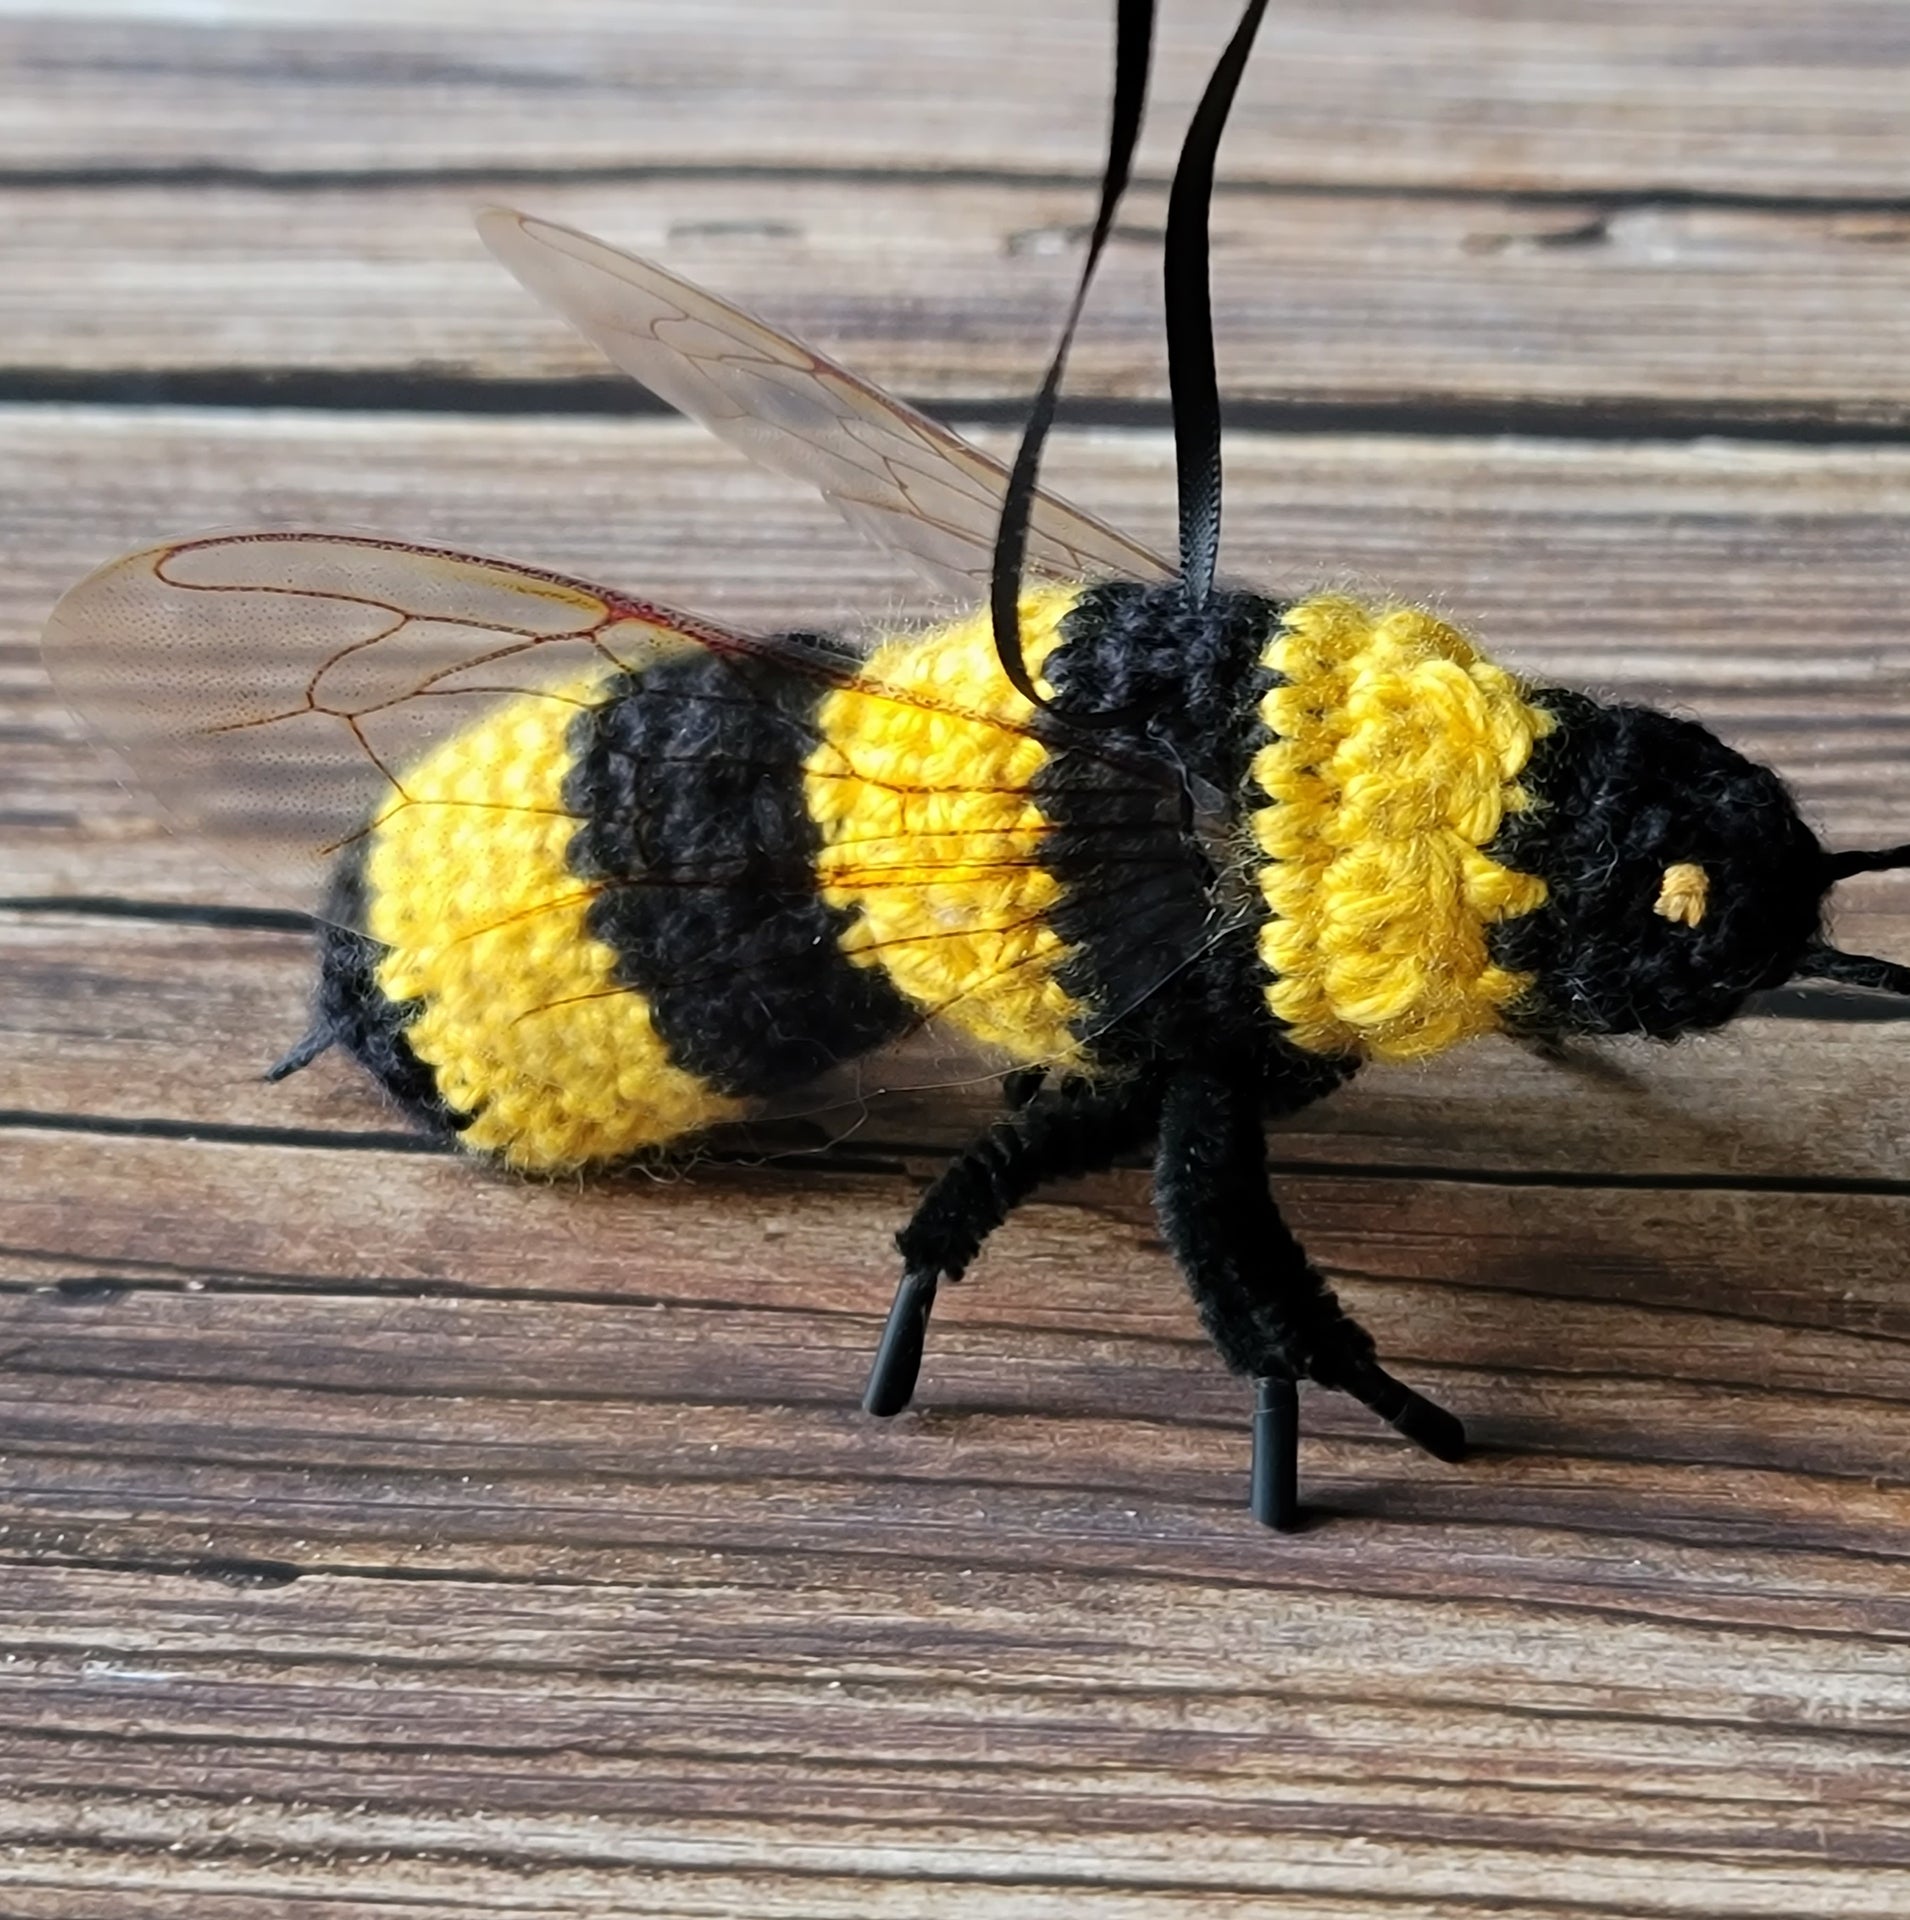 Bespoke Order Part 1 of 2 - ONE out of Set of 8 Bee Ornaments - Made to Order